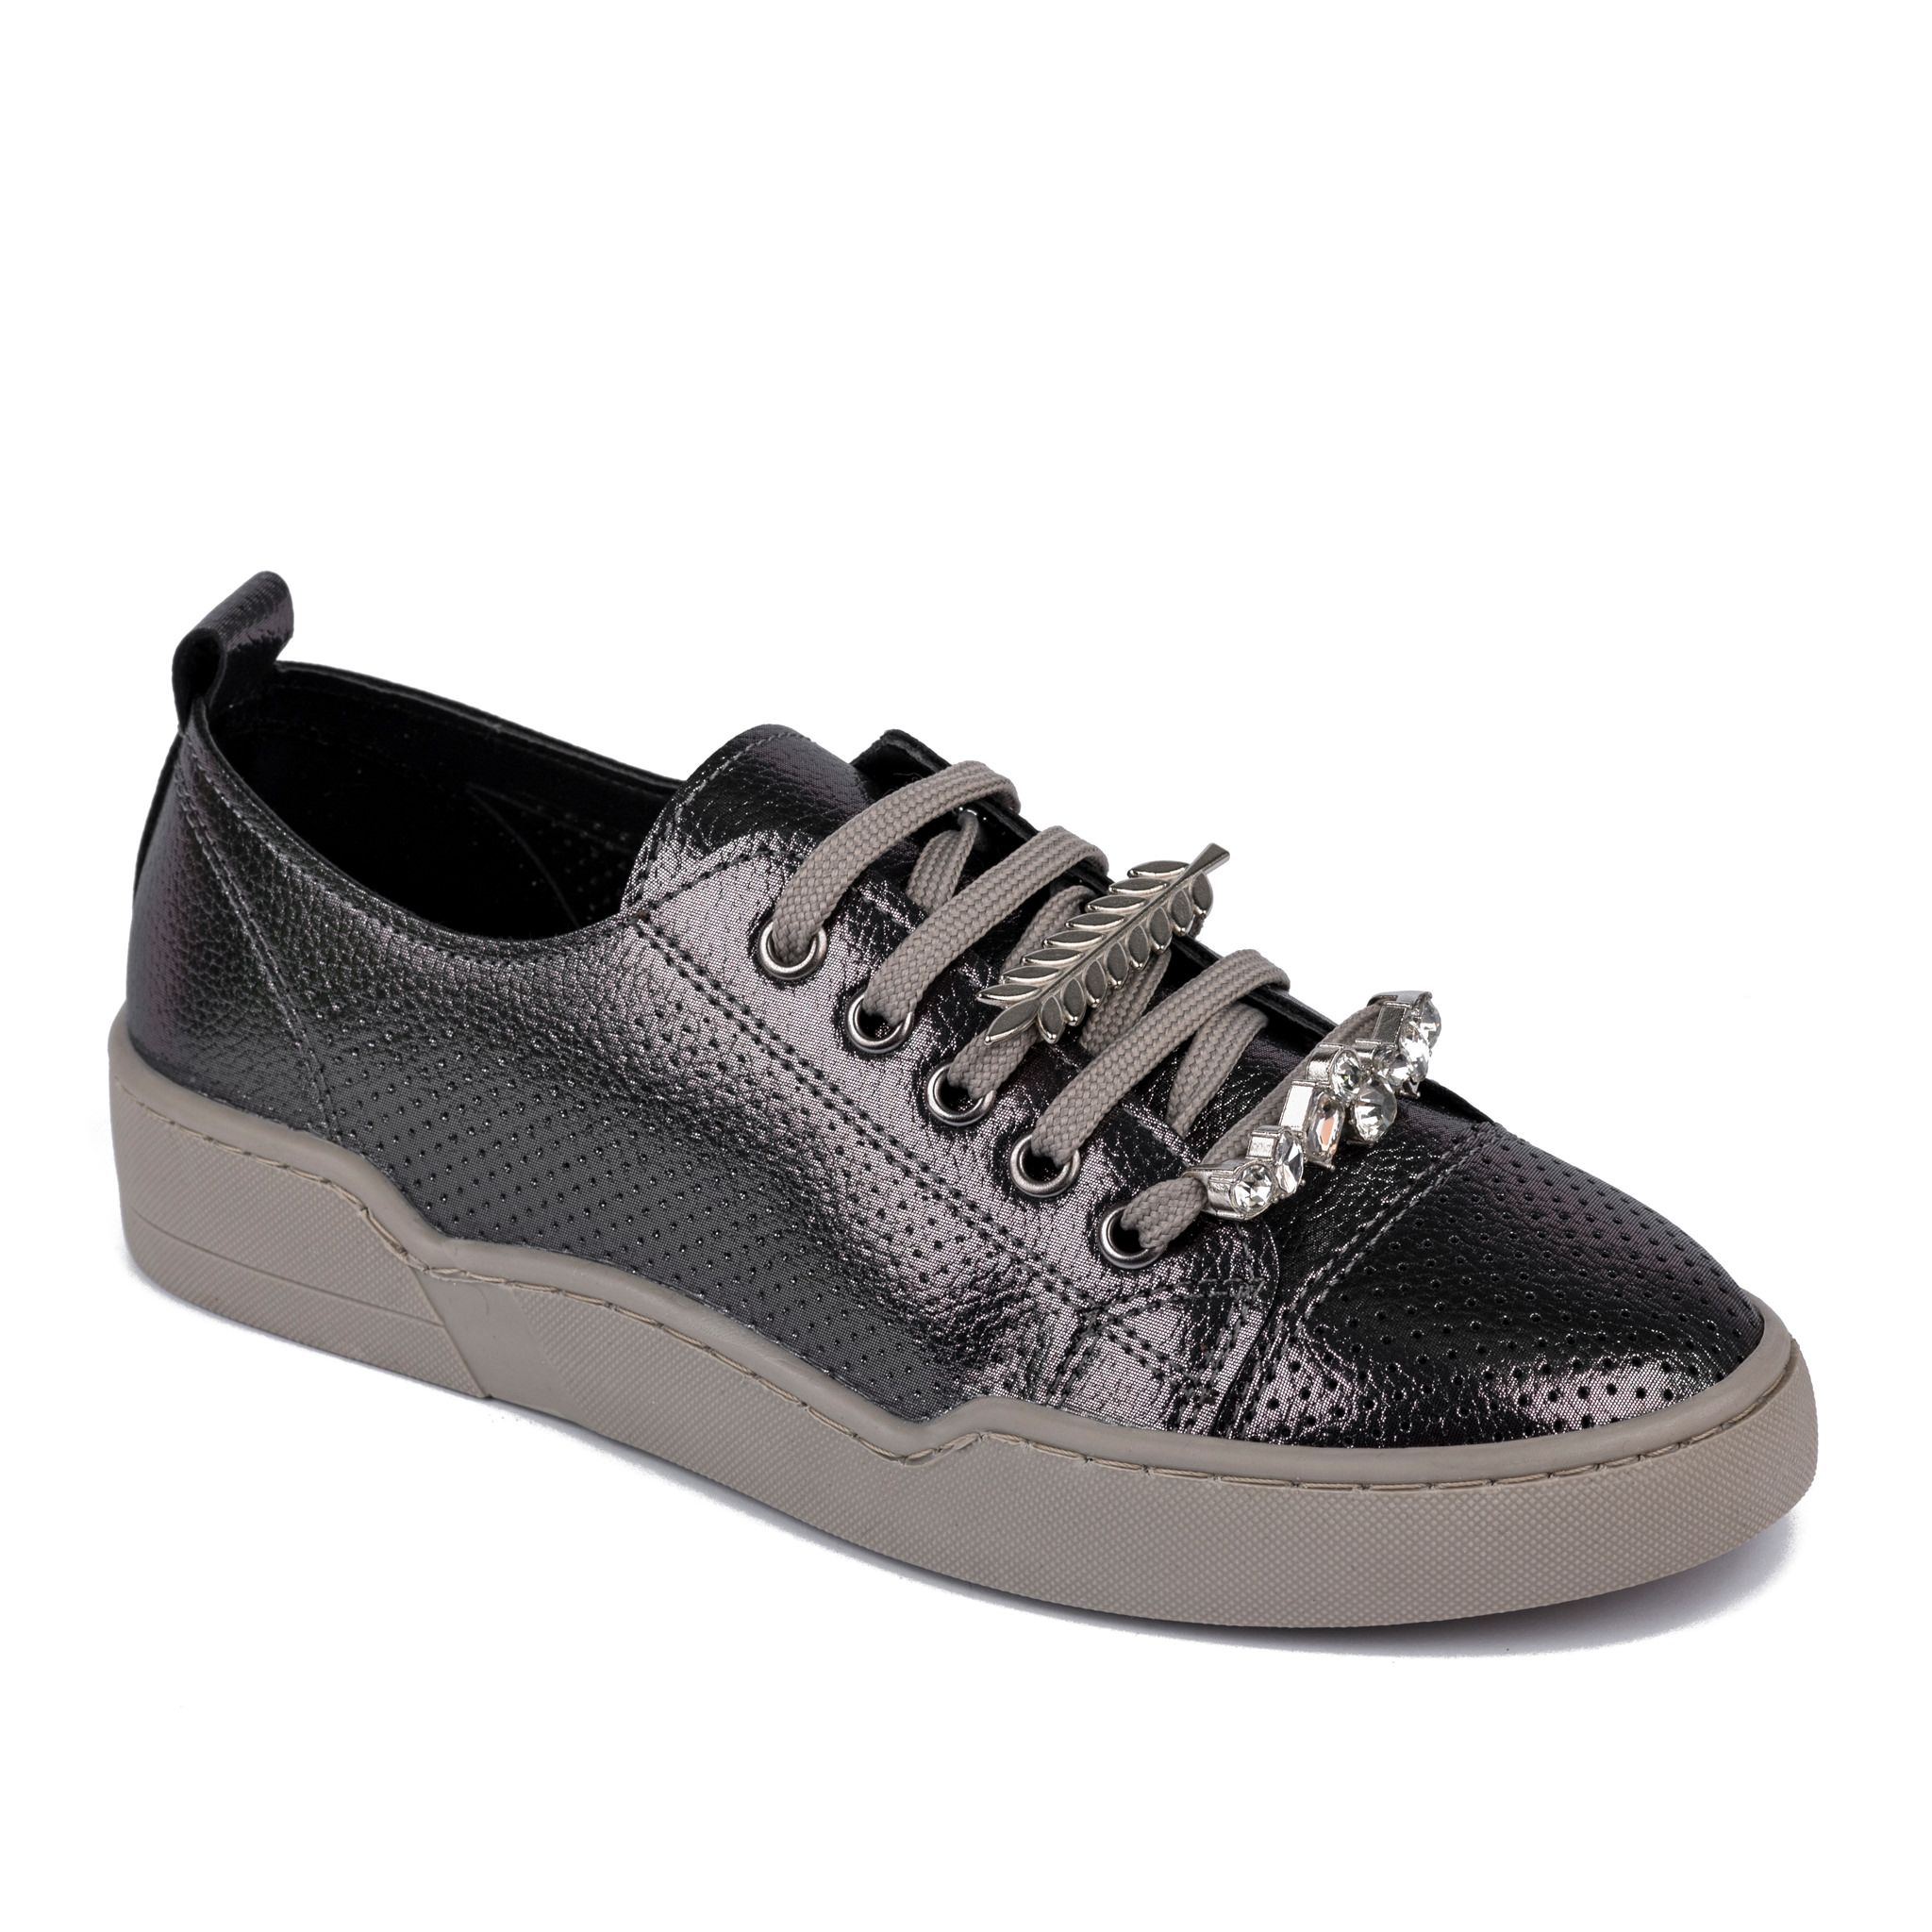 SHALLOW SNEAKERS WITH ORNAMENTS - GRAPHITE